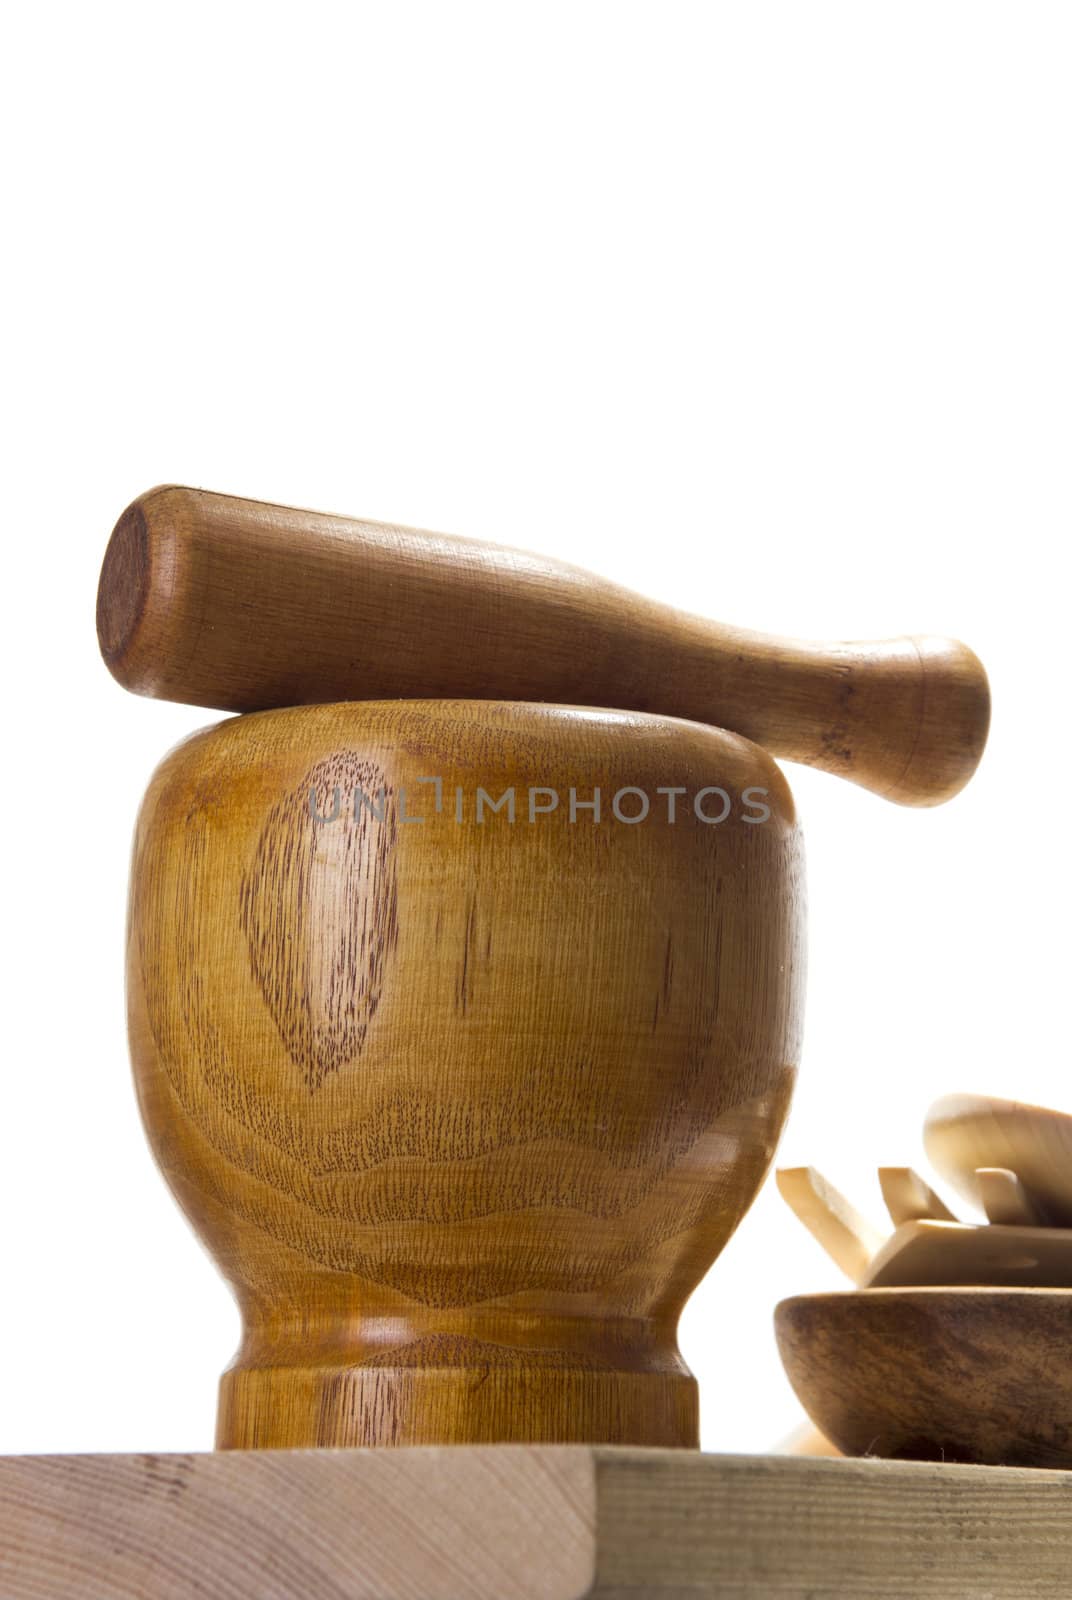 Wooden mortar and pestle on white background. Traditional kitchen equipment.